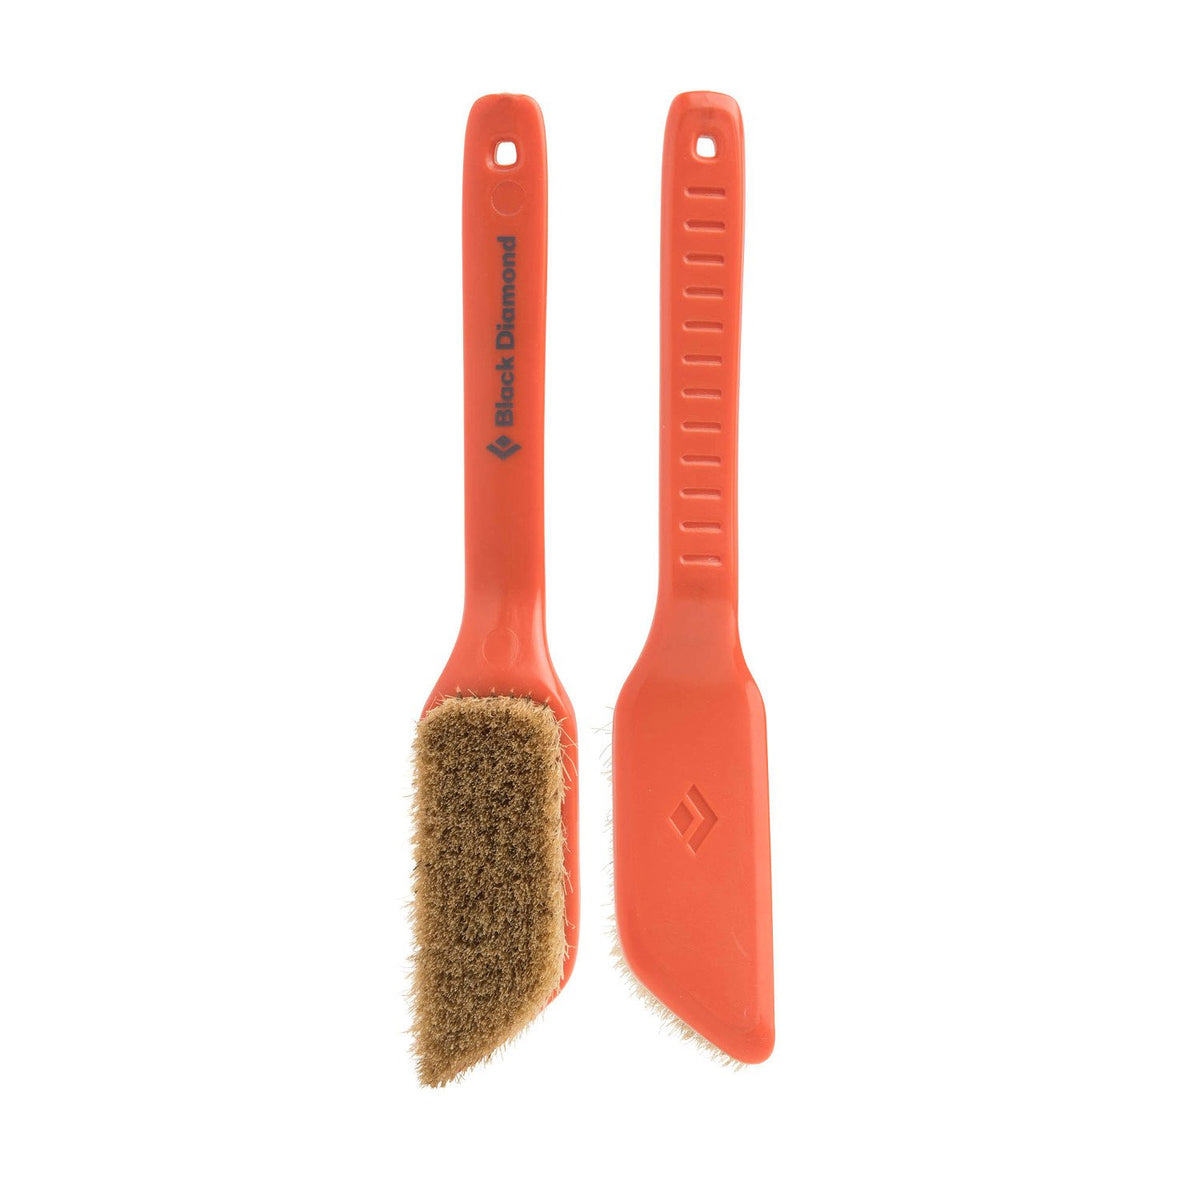 Pair of orange Black Diamond Boars Hair Brushes - Medium, 1 shown facing and 1 shown in the reverse